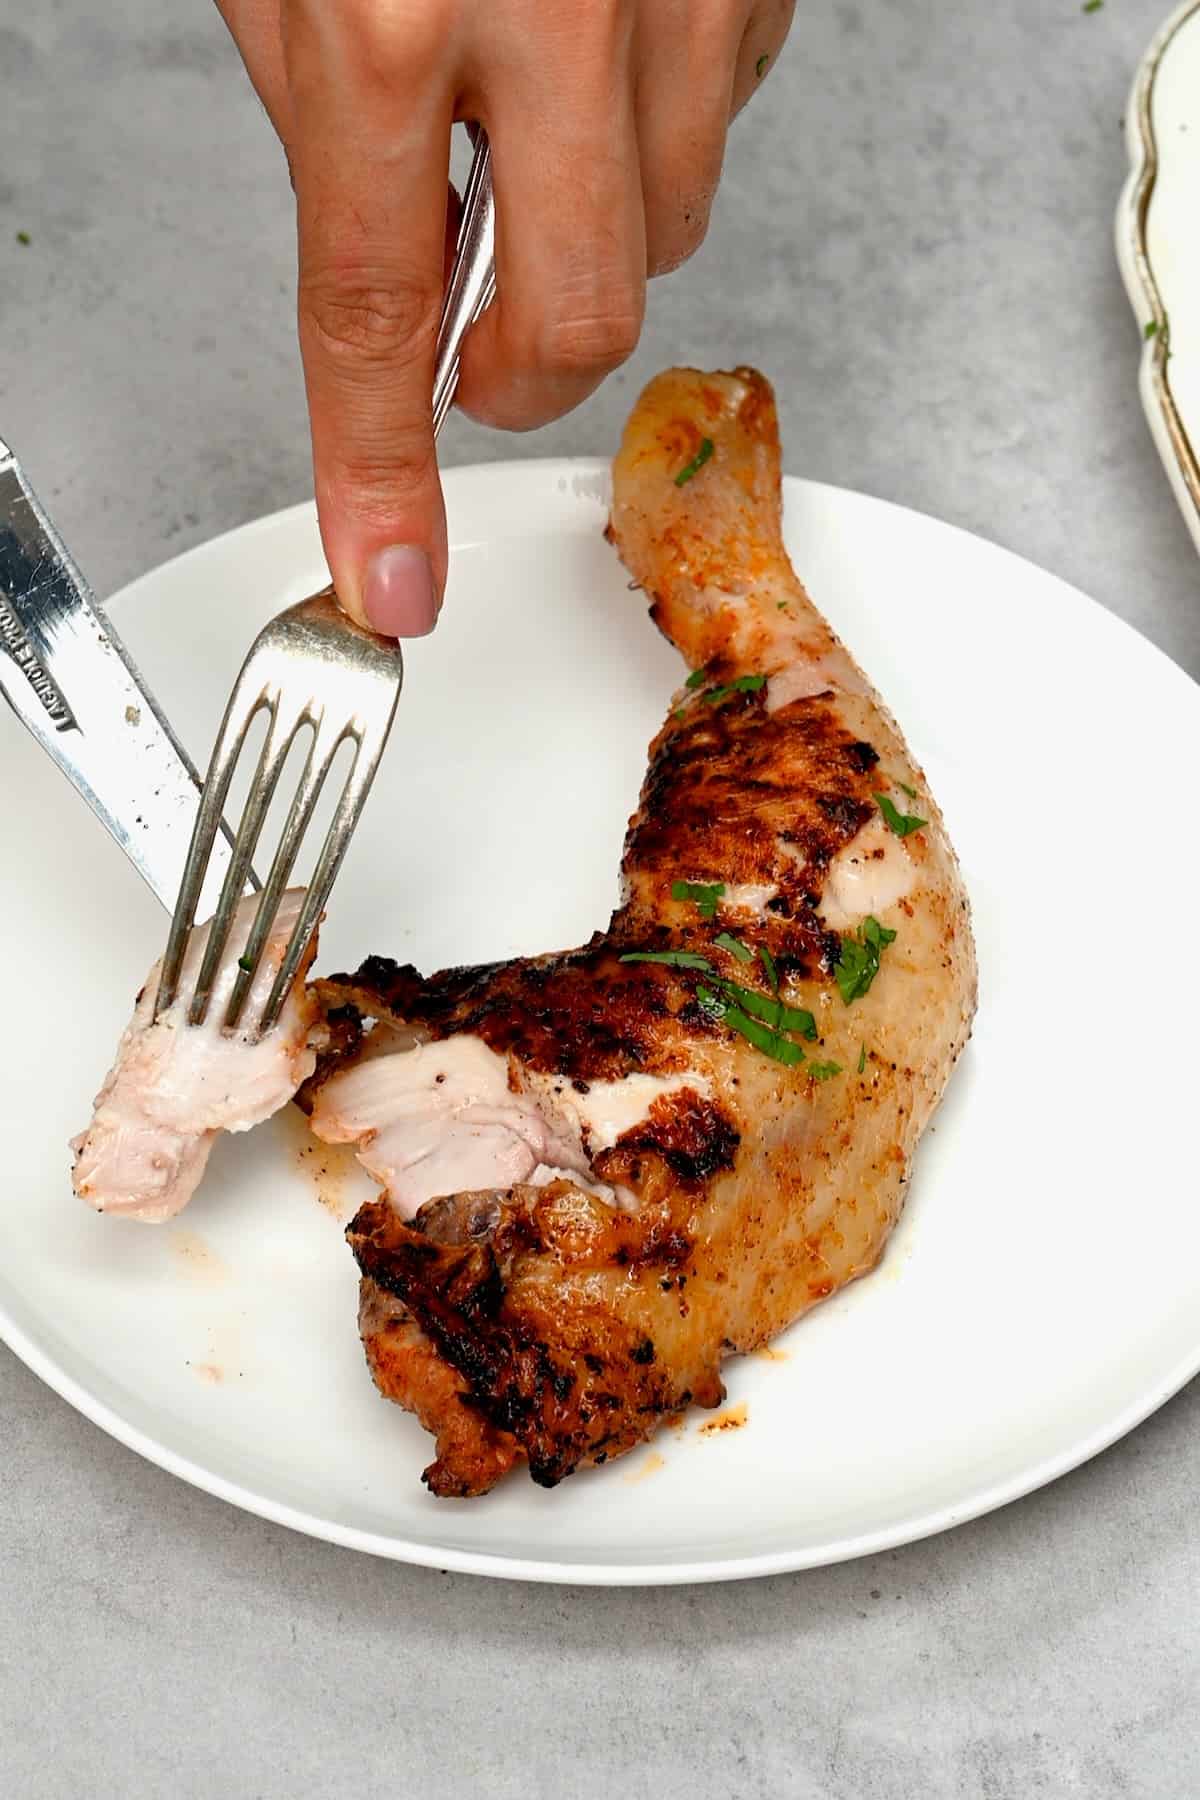 Grilled chicken quarter served on a plate